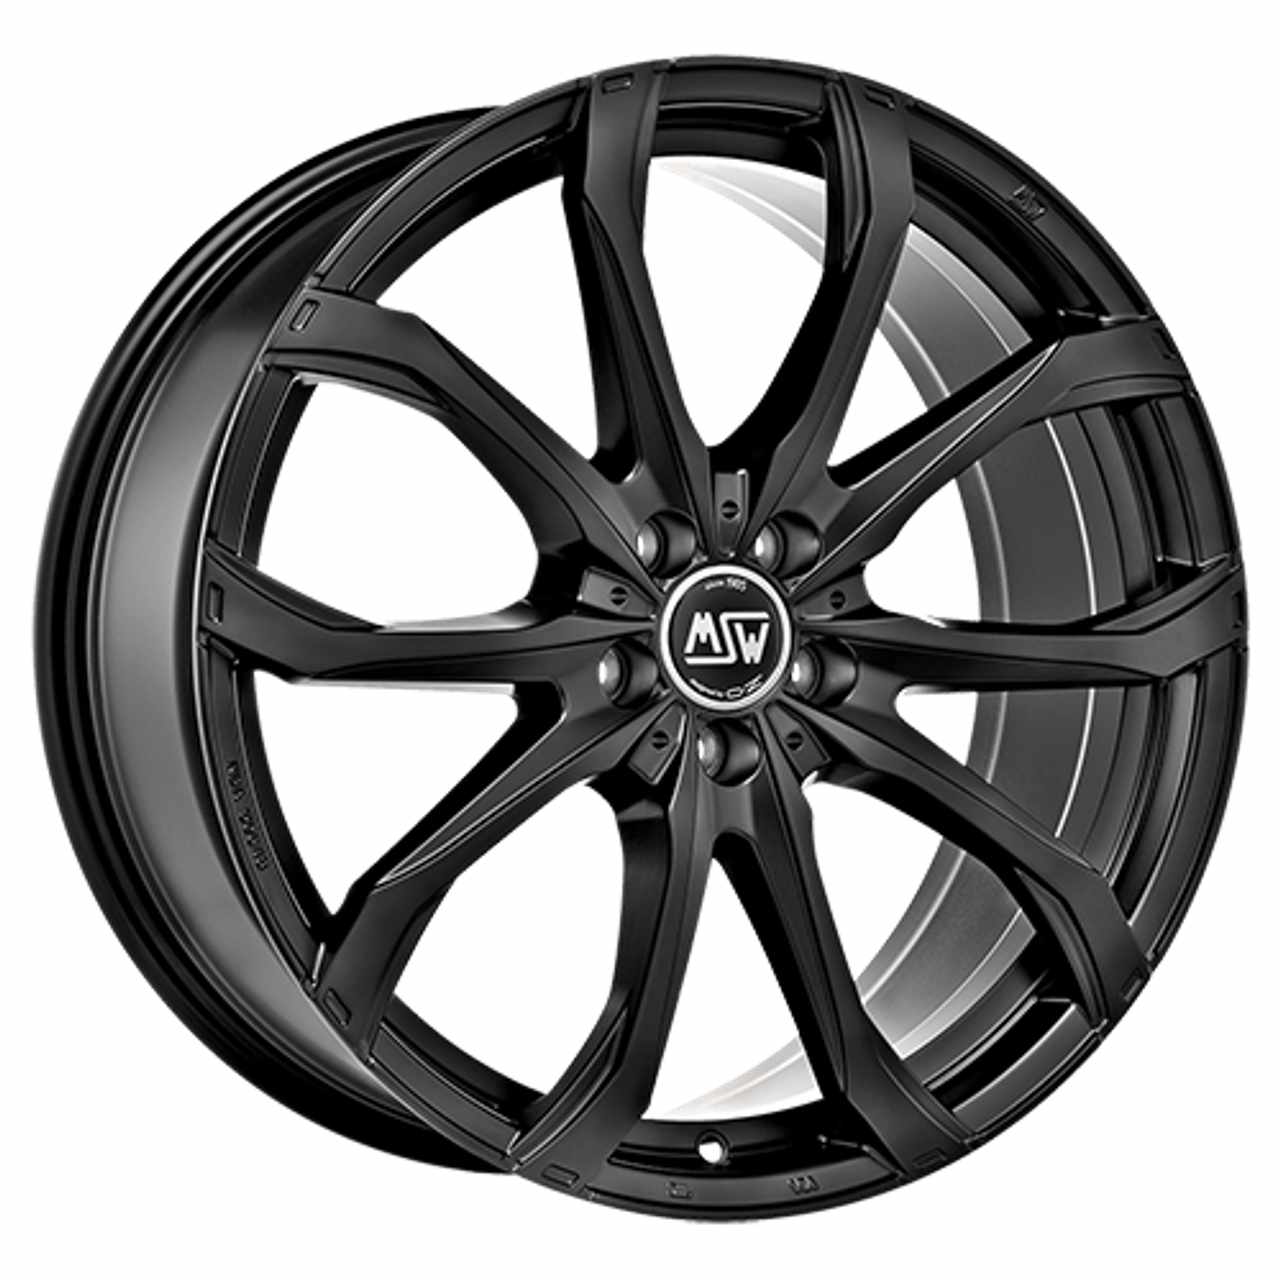 MSW (OZ) MSW 48 gloss black full polished 9.0Jx21 5x112 ET26